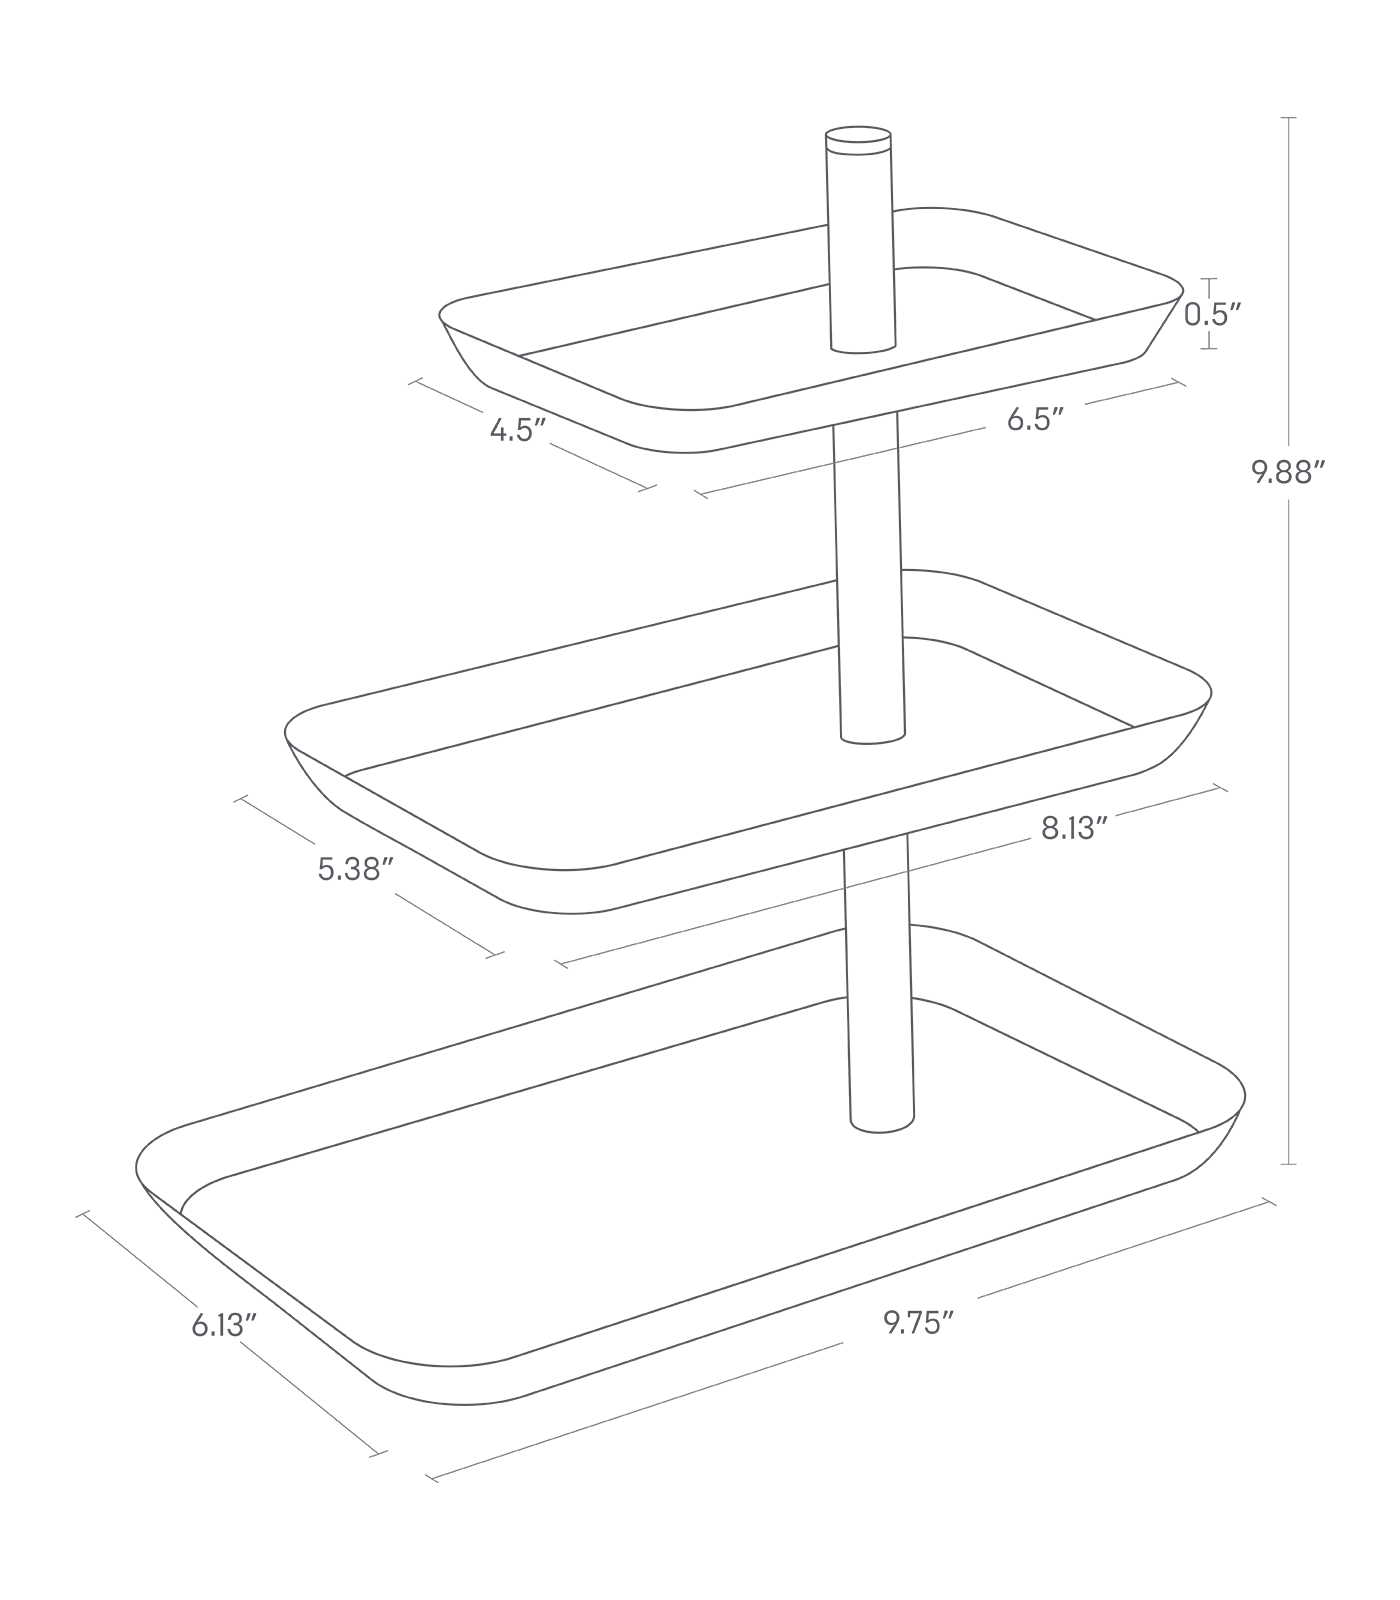 Dimension image for Serving Stand showing length of 9.75